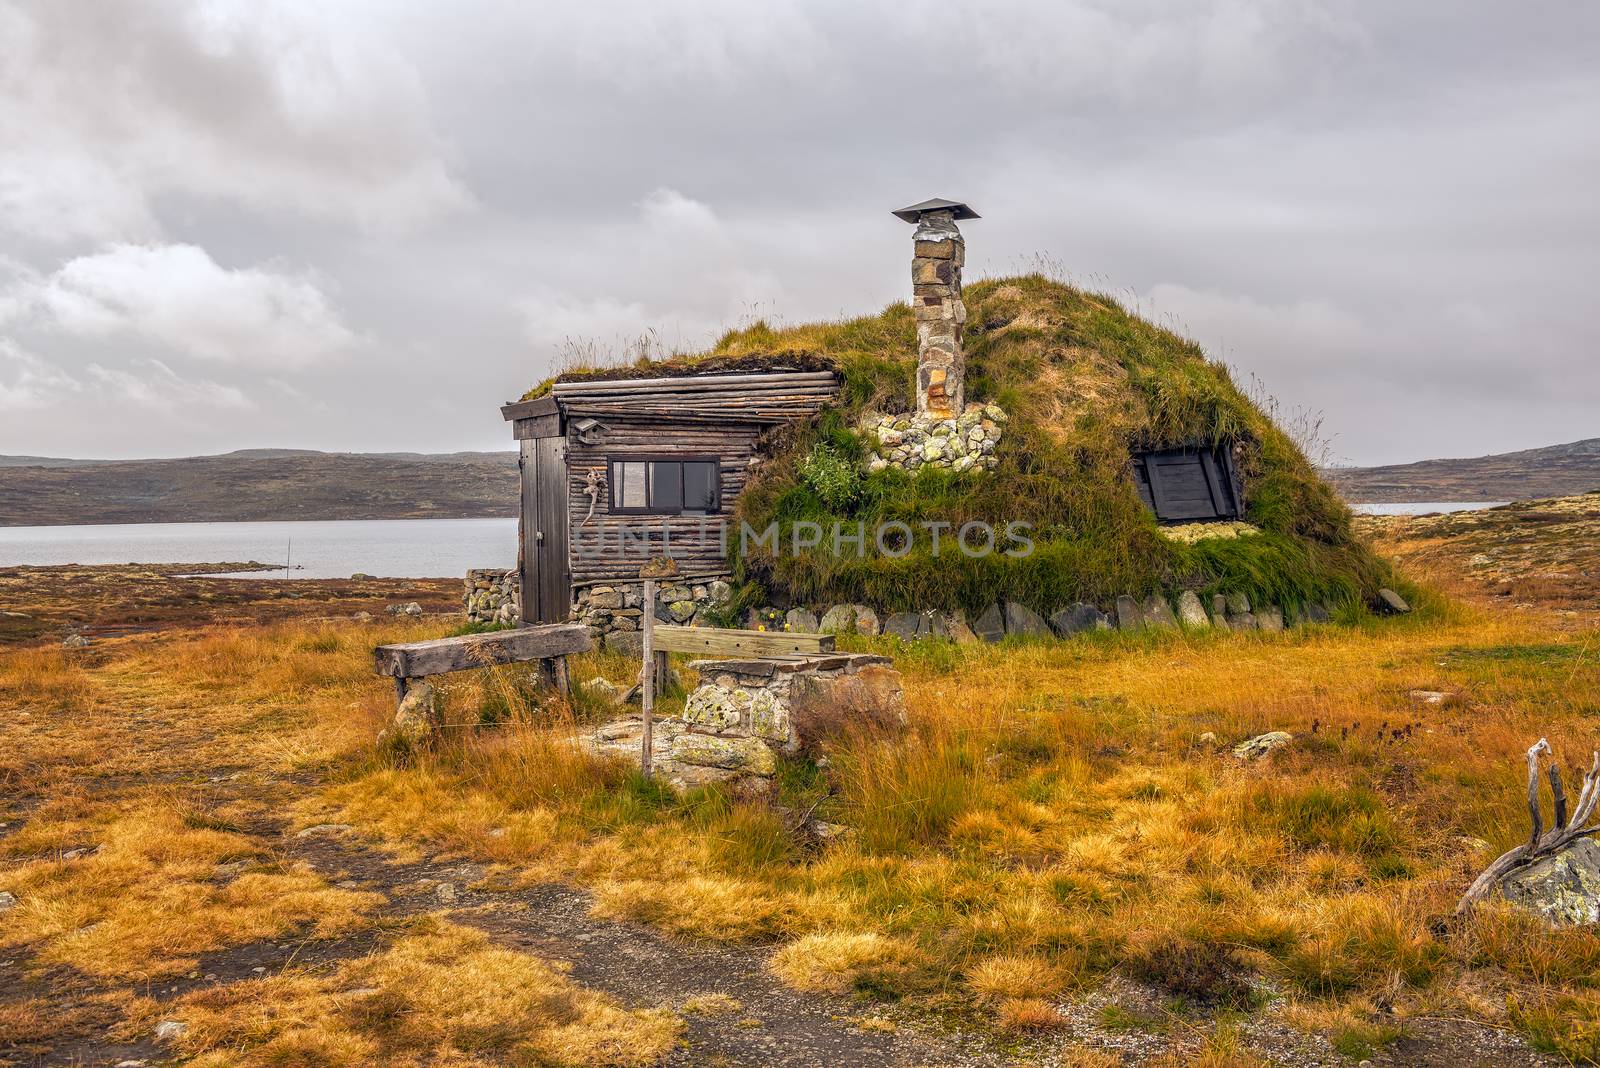 Cabin with turf roof near Hardangervidda National Park in Norway by nickfox